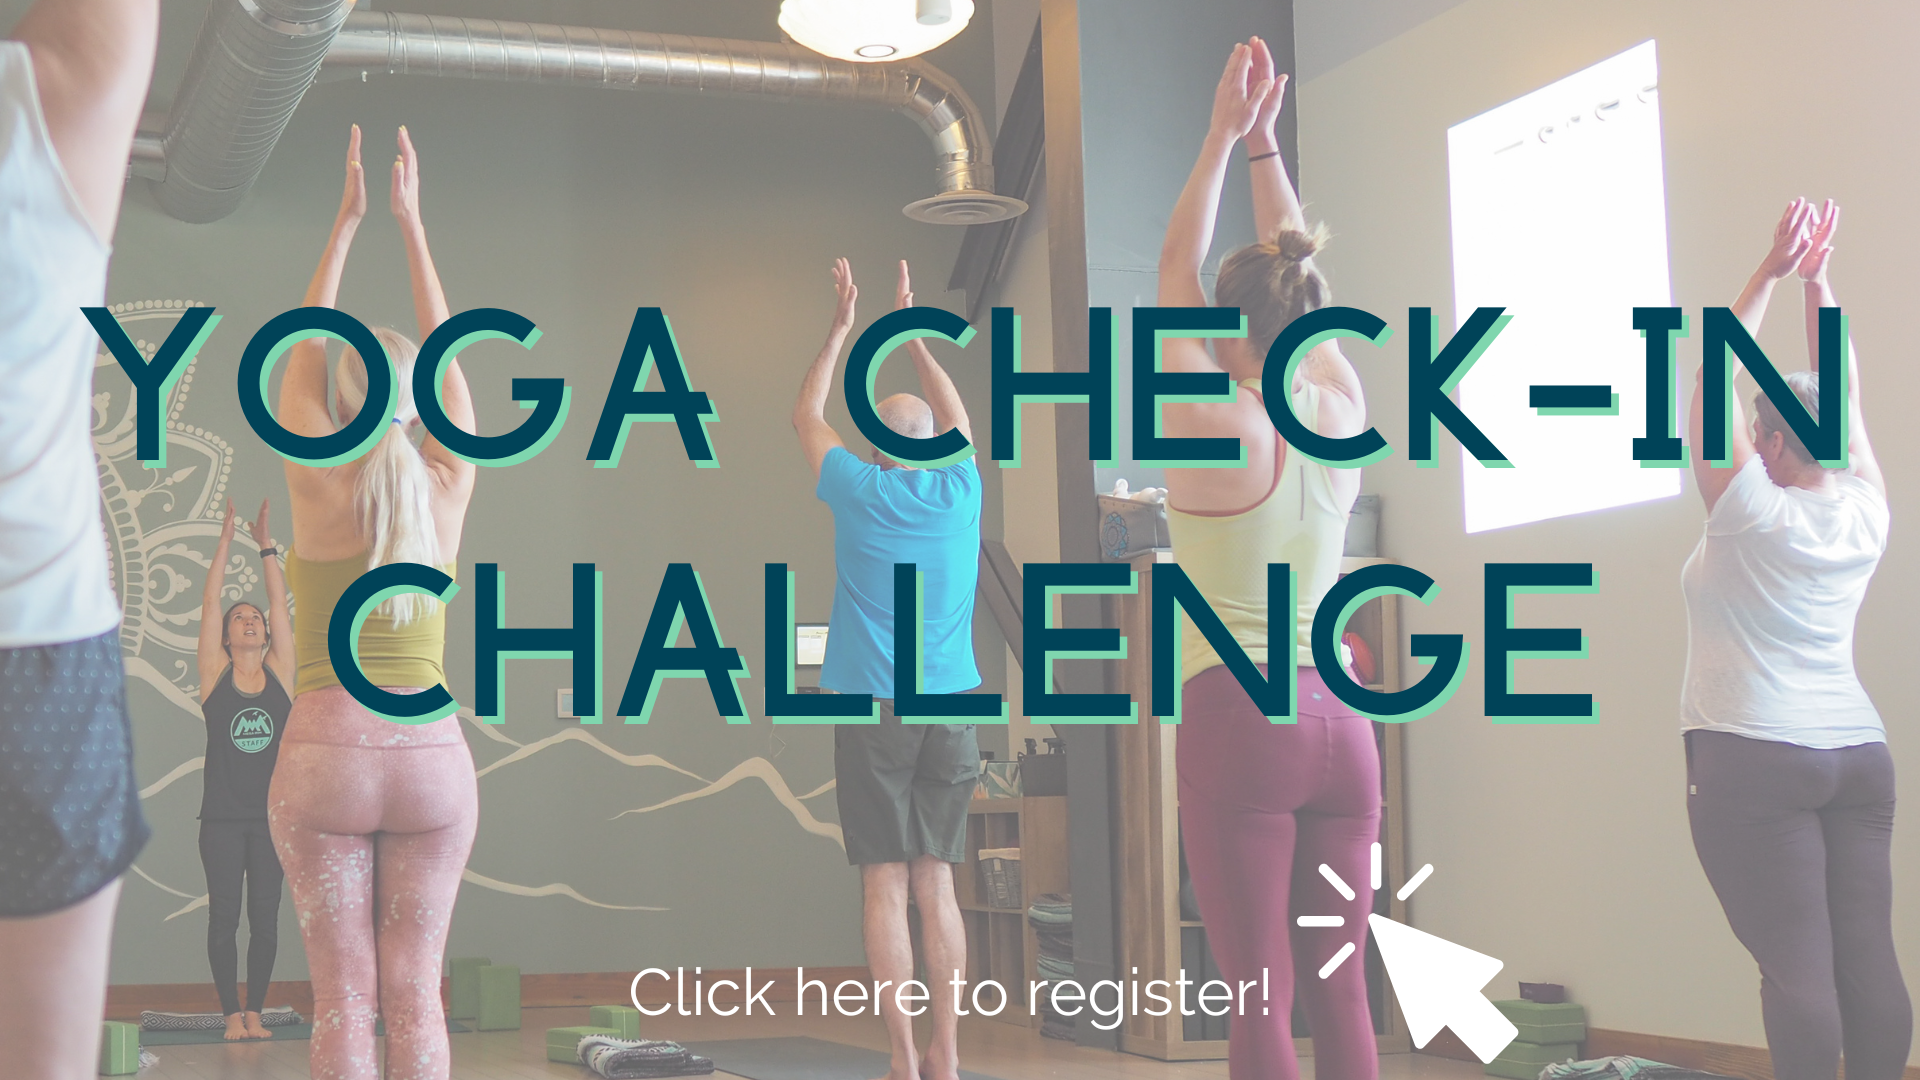 Yoga Check-in Challenge